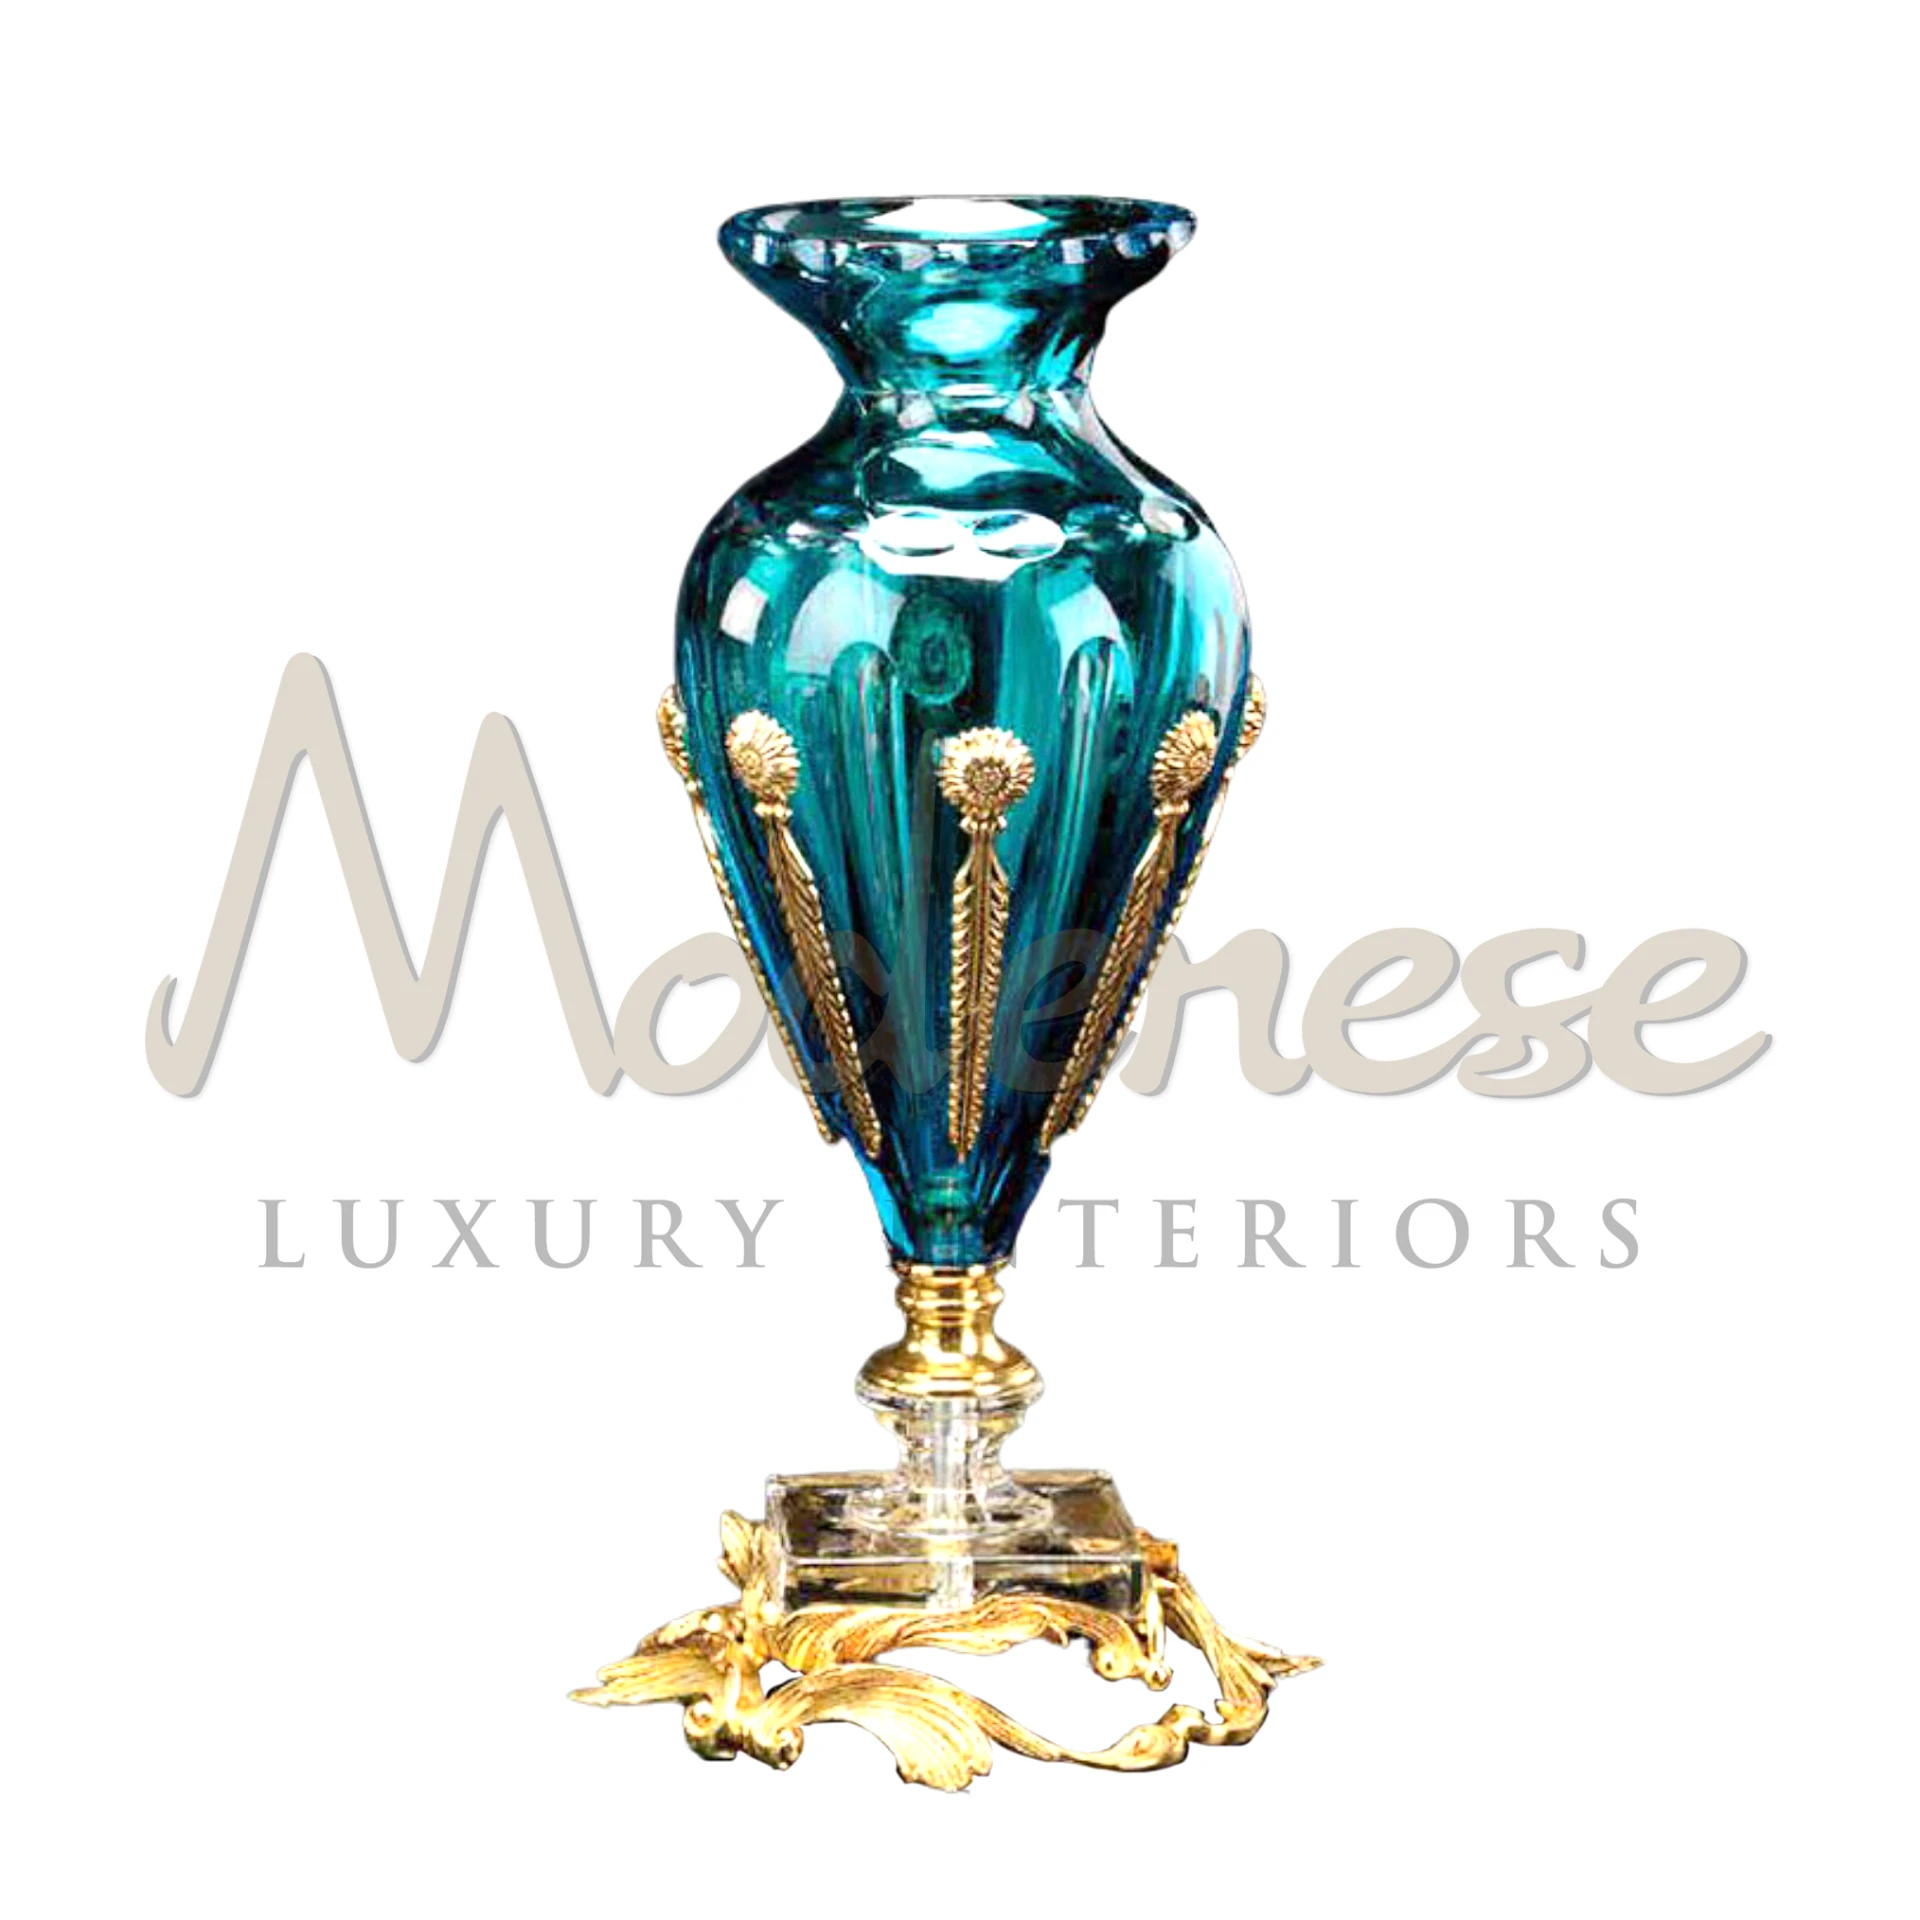 Classical Turquoise Glass Vase with intricate patterns, a timeless piece that adds elegance and style to luxury and classic interior settings.